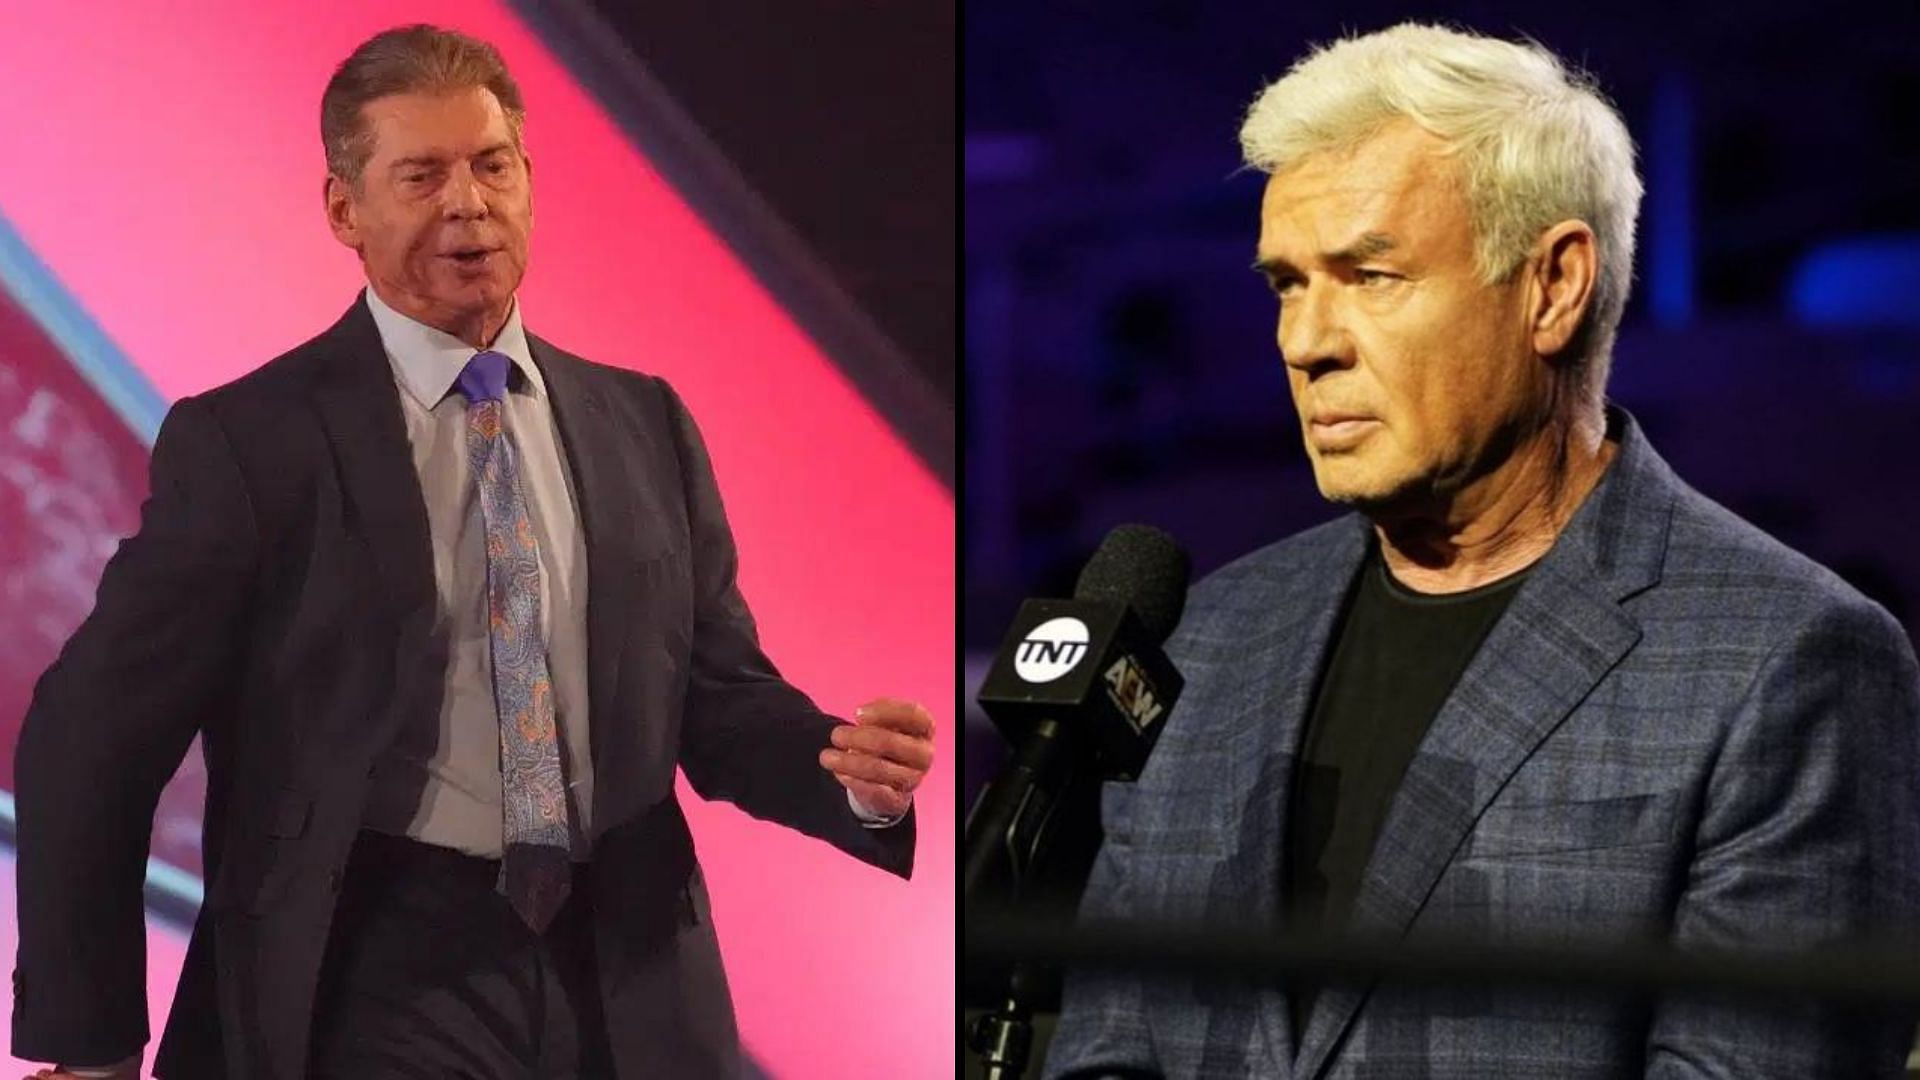 Vince McMahon and Eric Bischoff both worked together in WWE